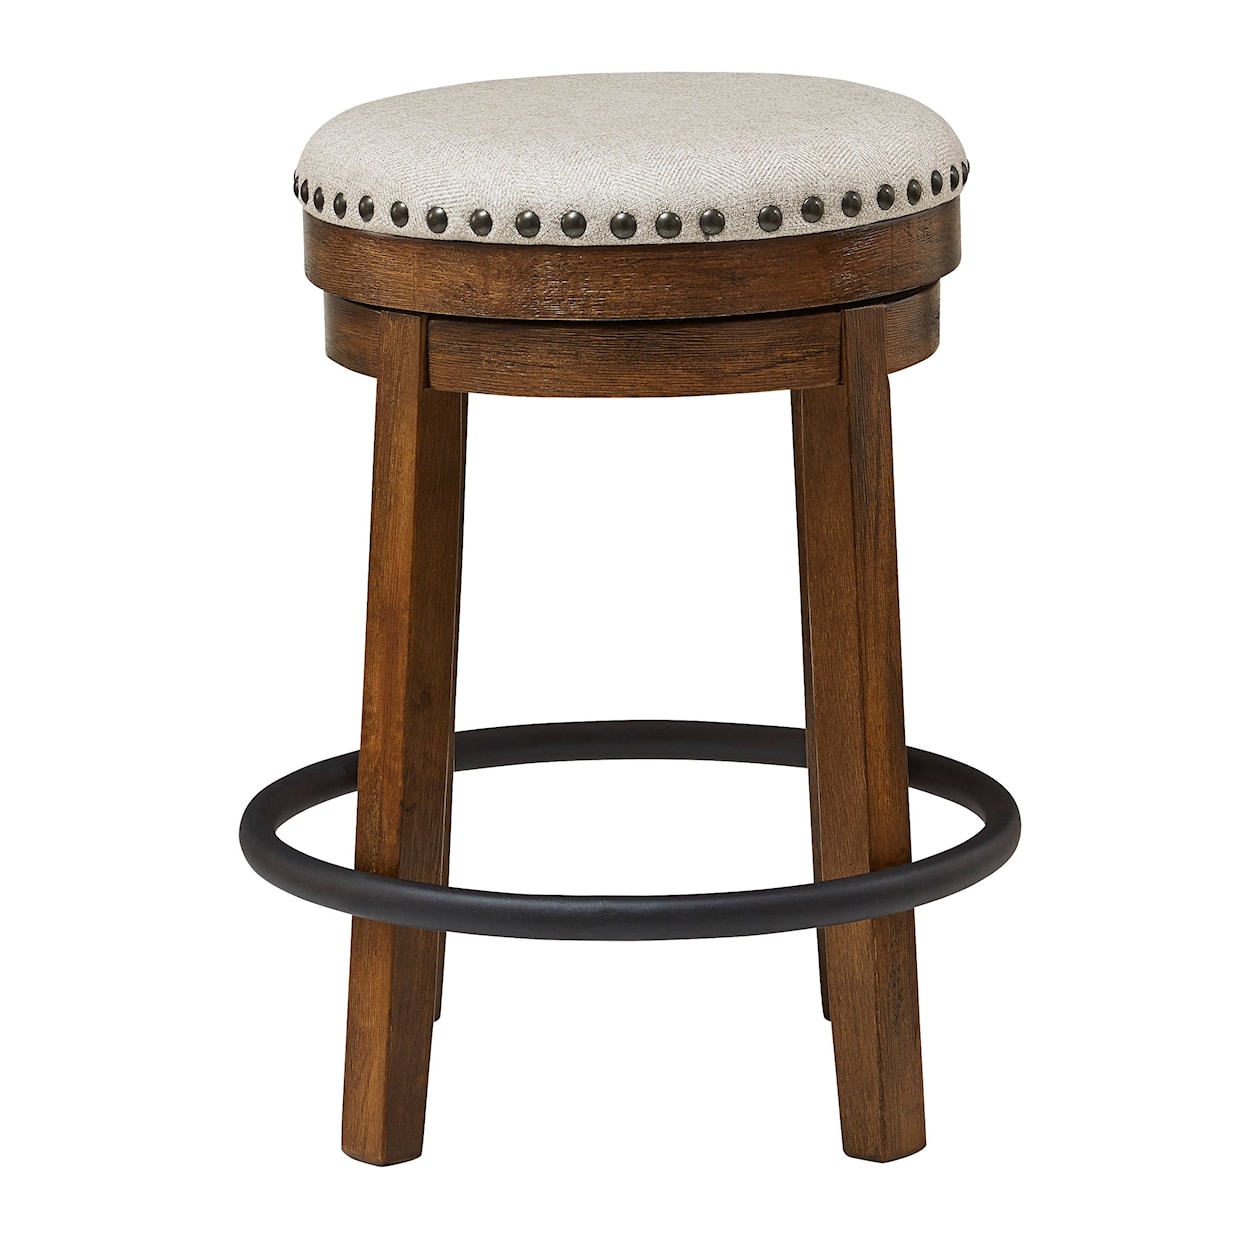 Benchcraft Valebeck Counter Height Stool